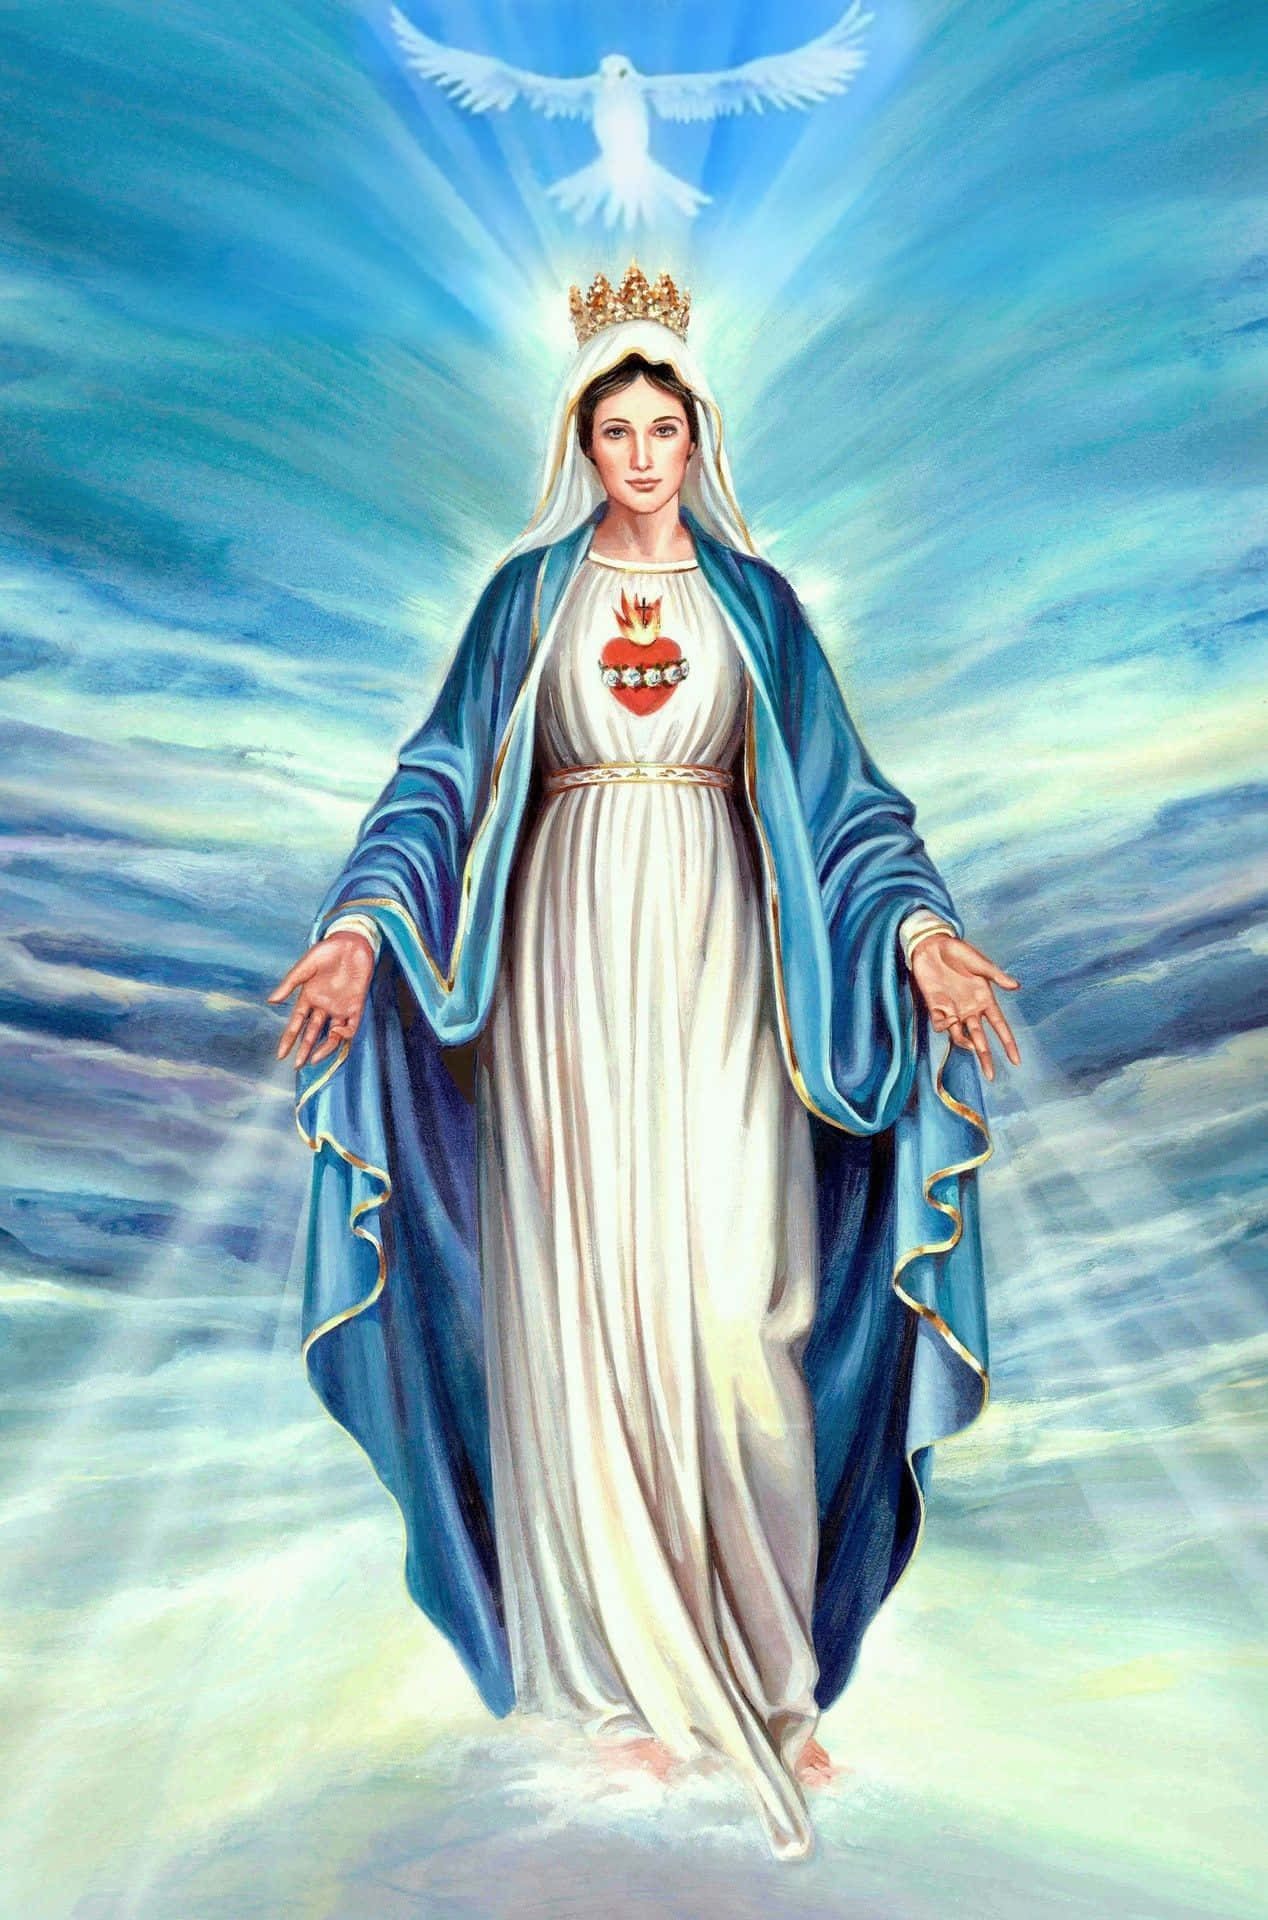 Looking to Mother Mary for guidance